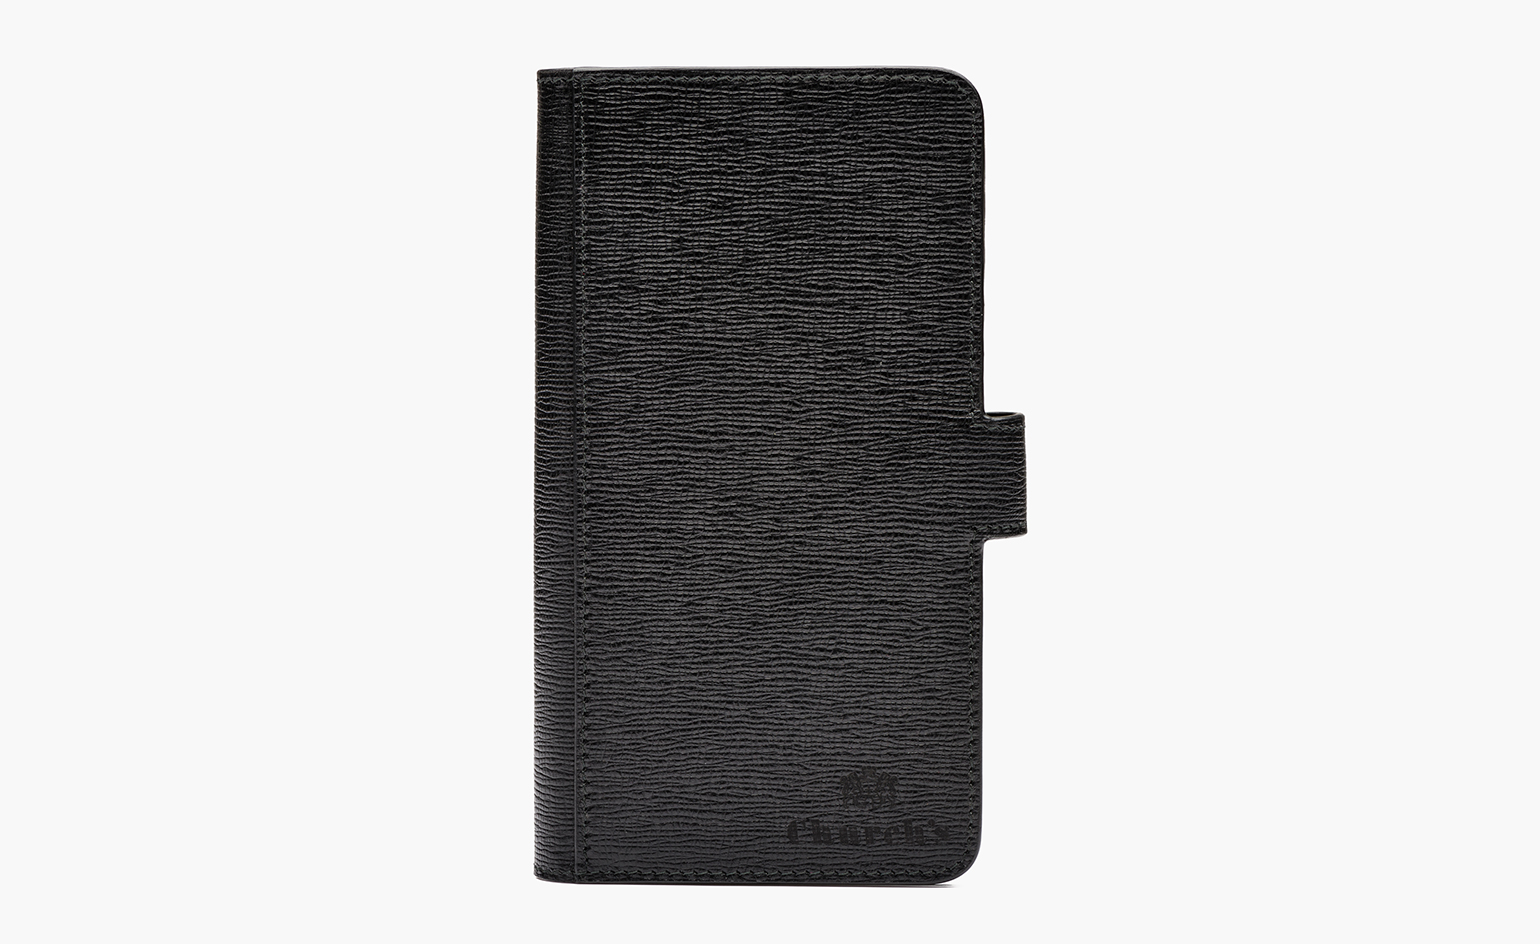 Church’s launches its inaugural leather goods collection | Wallpaper